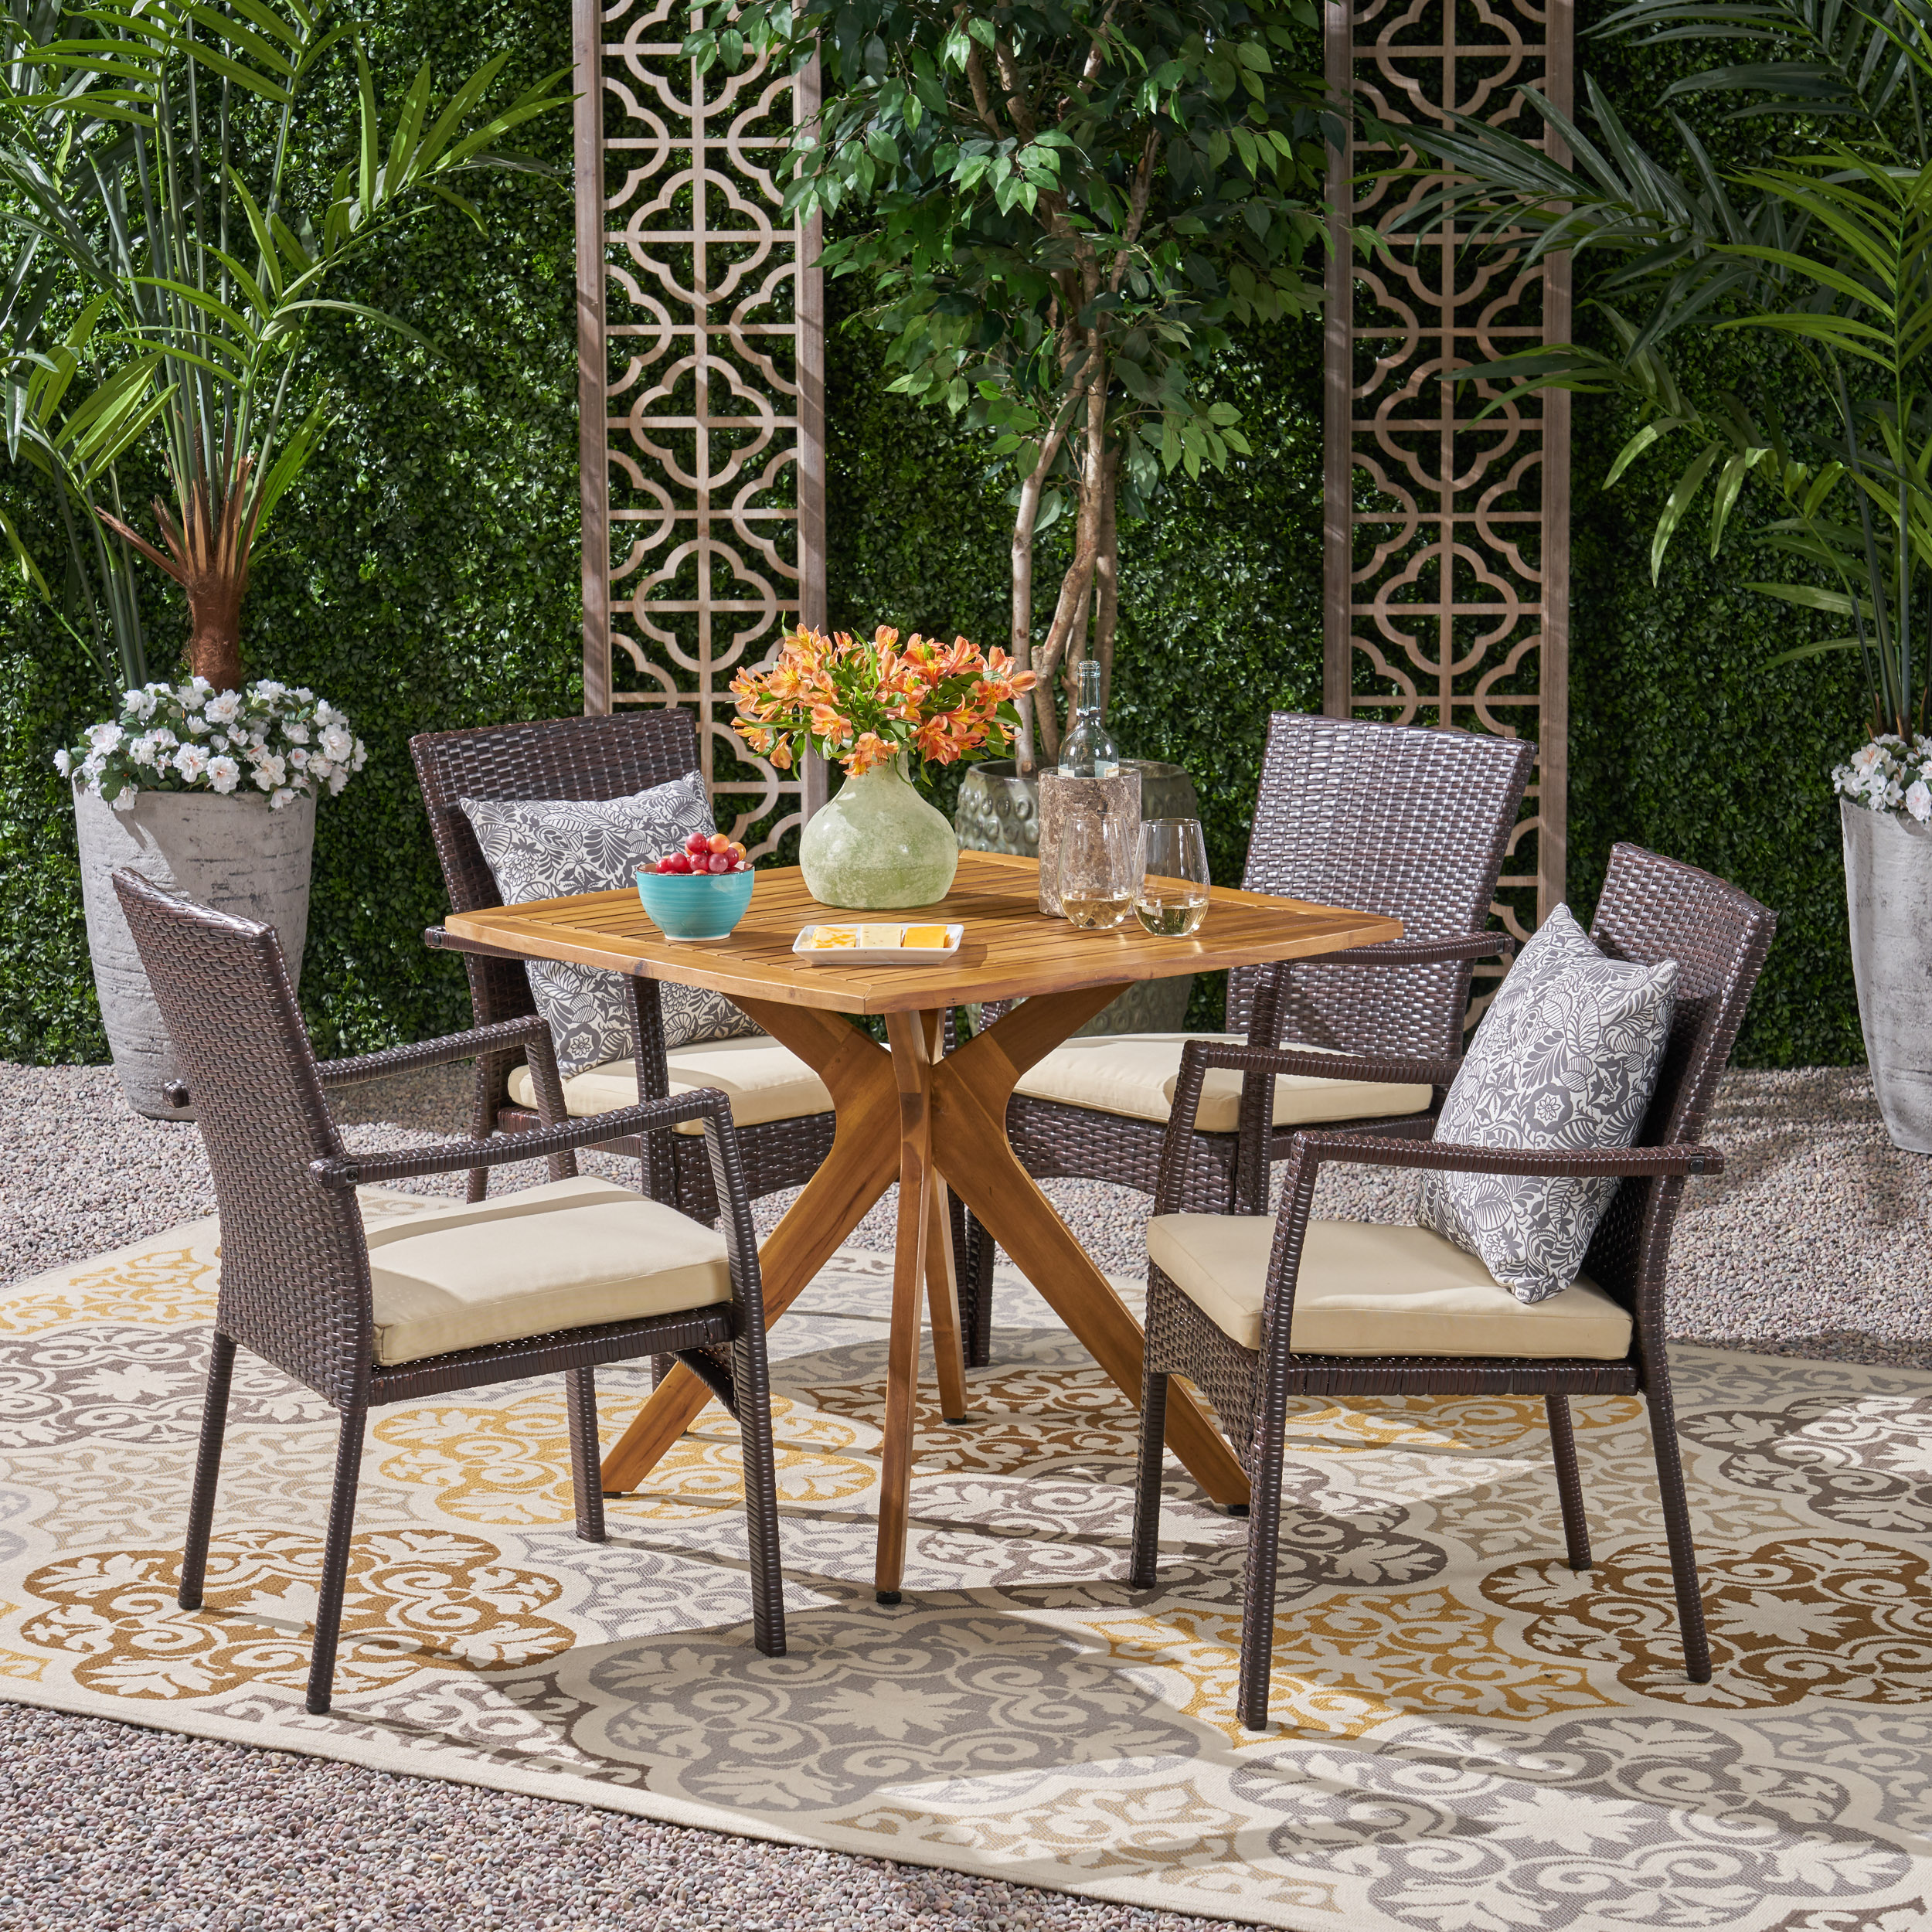 Jose Outdoor 5 Piece Acacia Wood Dining Set and Wicker Chairs, Teak, Multi Brown, Crème - image 1 of 8